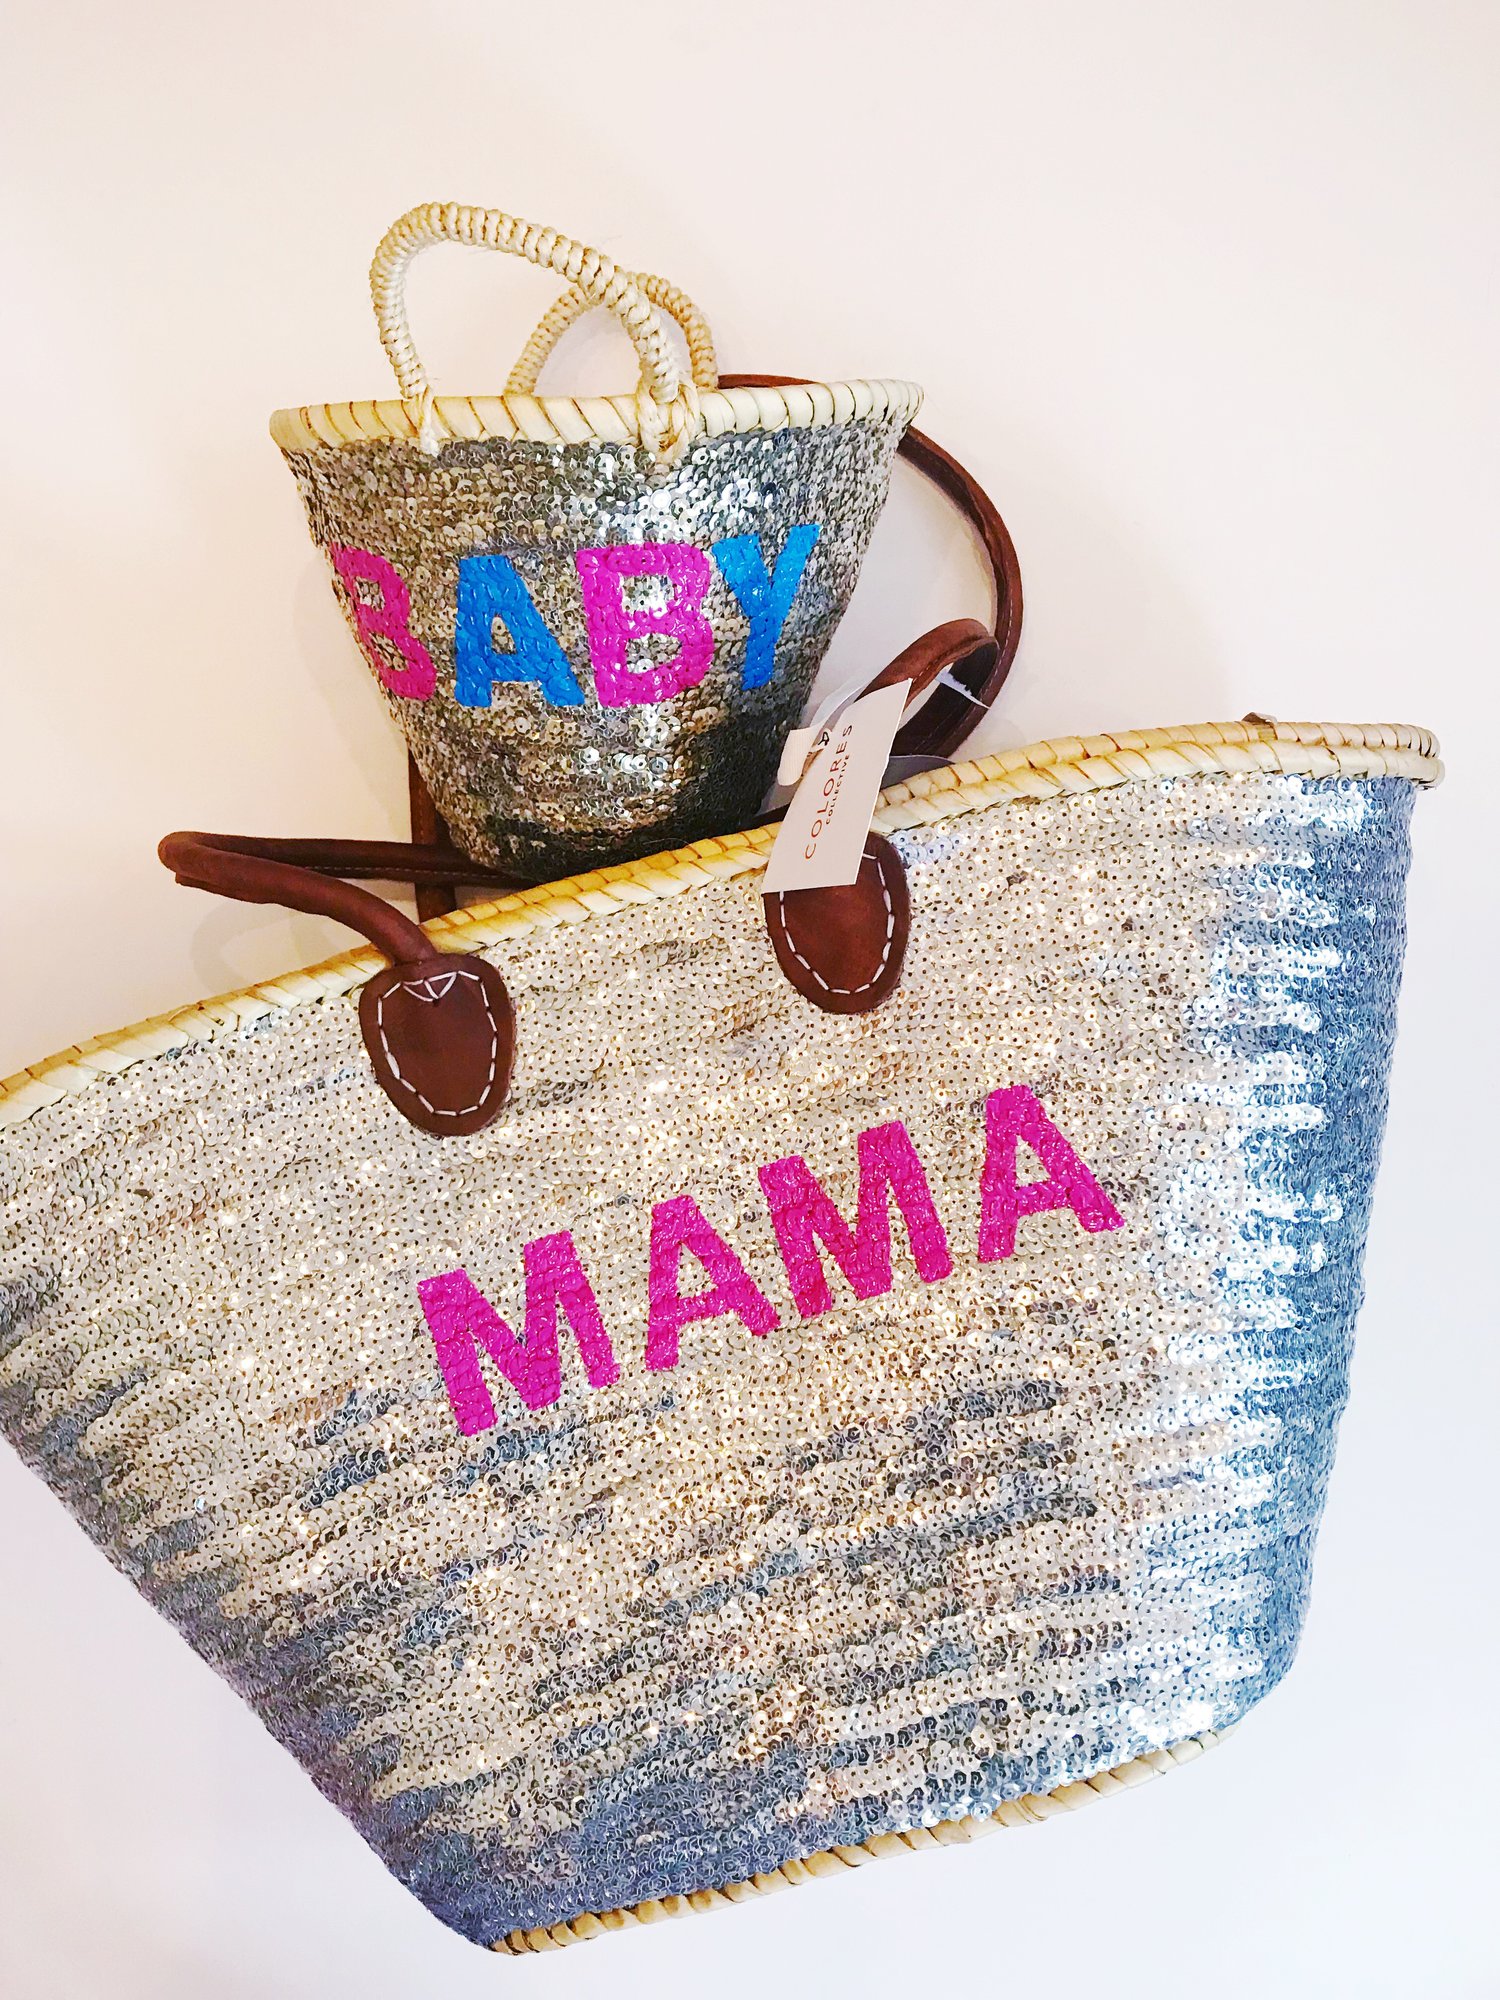 Large Straw Tote with Silver Sequin Hearts – Sand and Straw